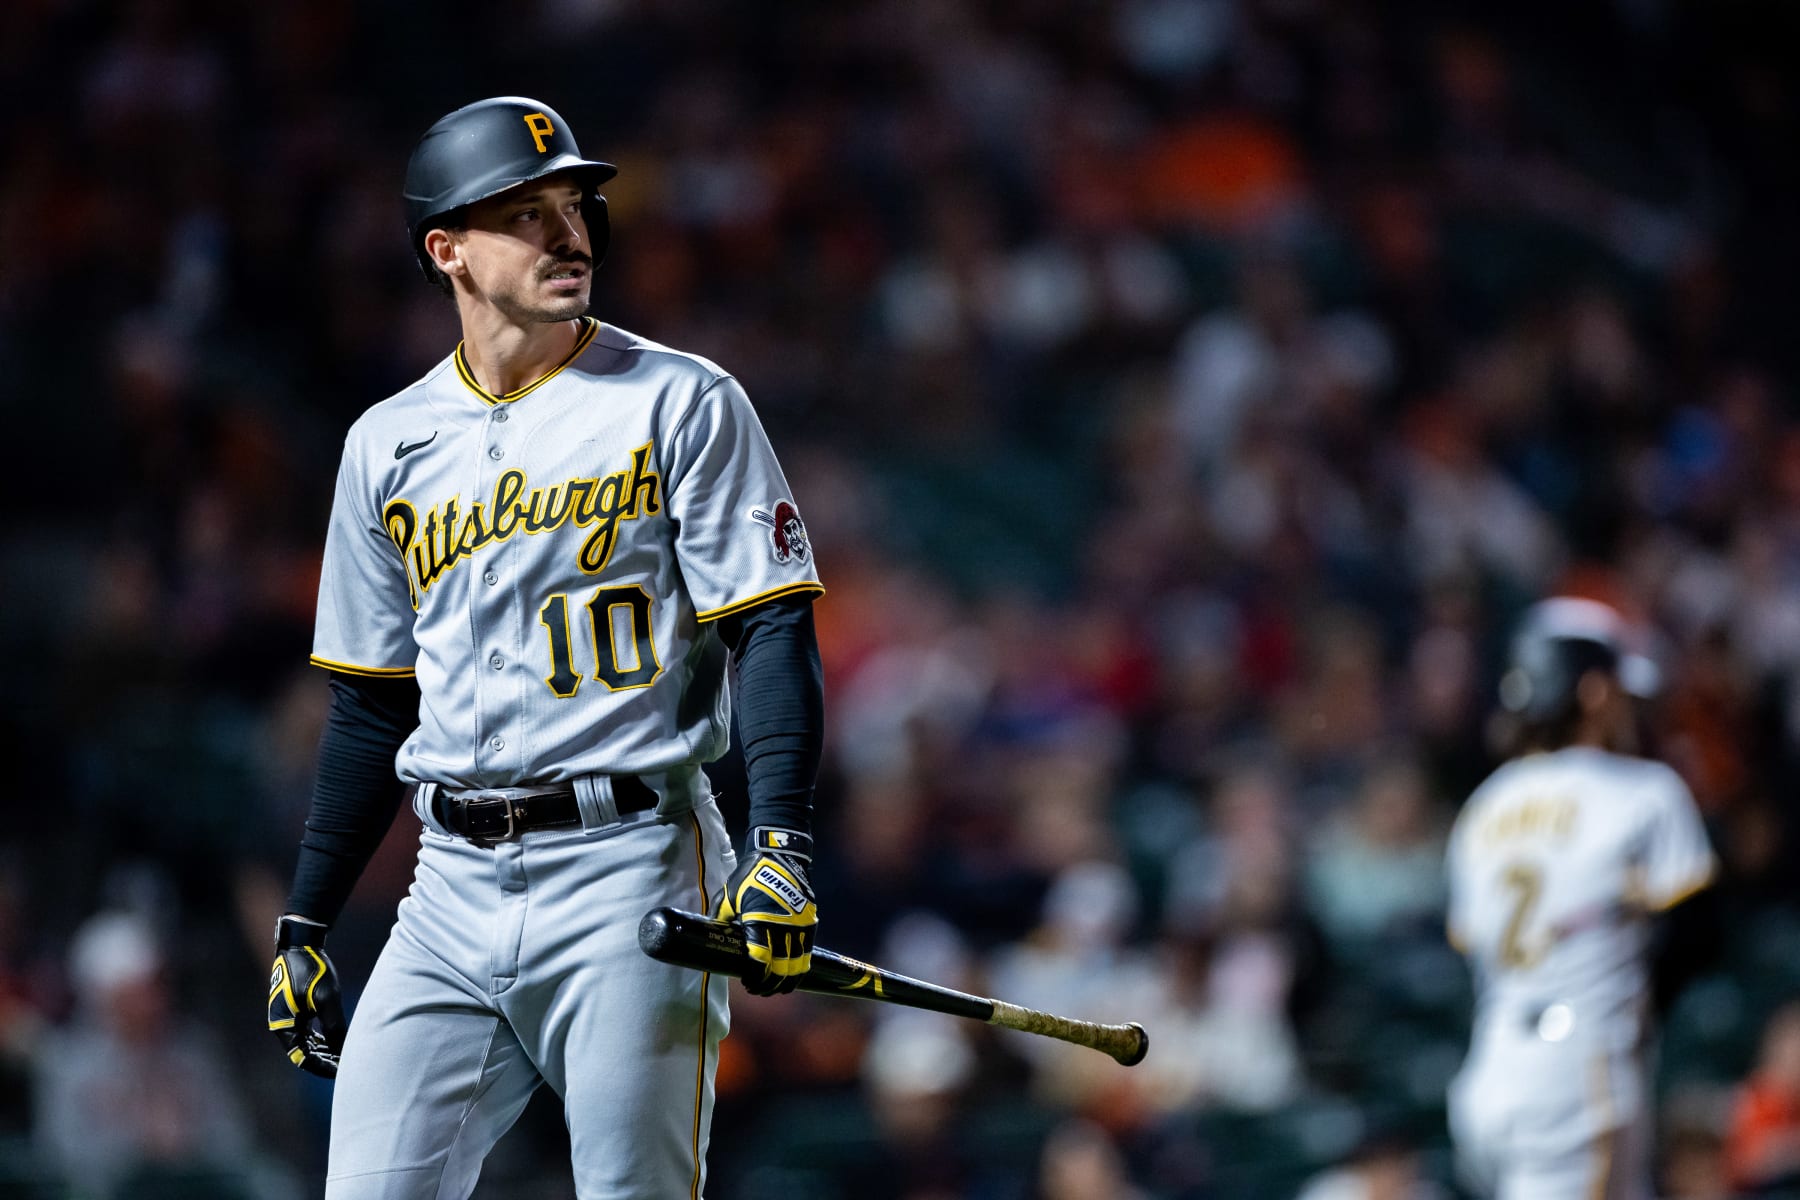 AP sources: Pirates, outfielder Bryan Reynolds agree to 8-year deal